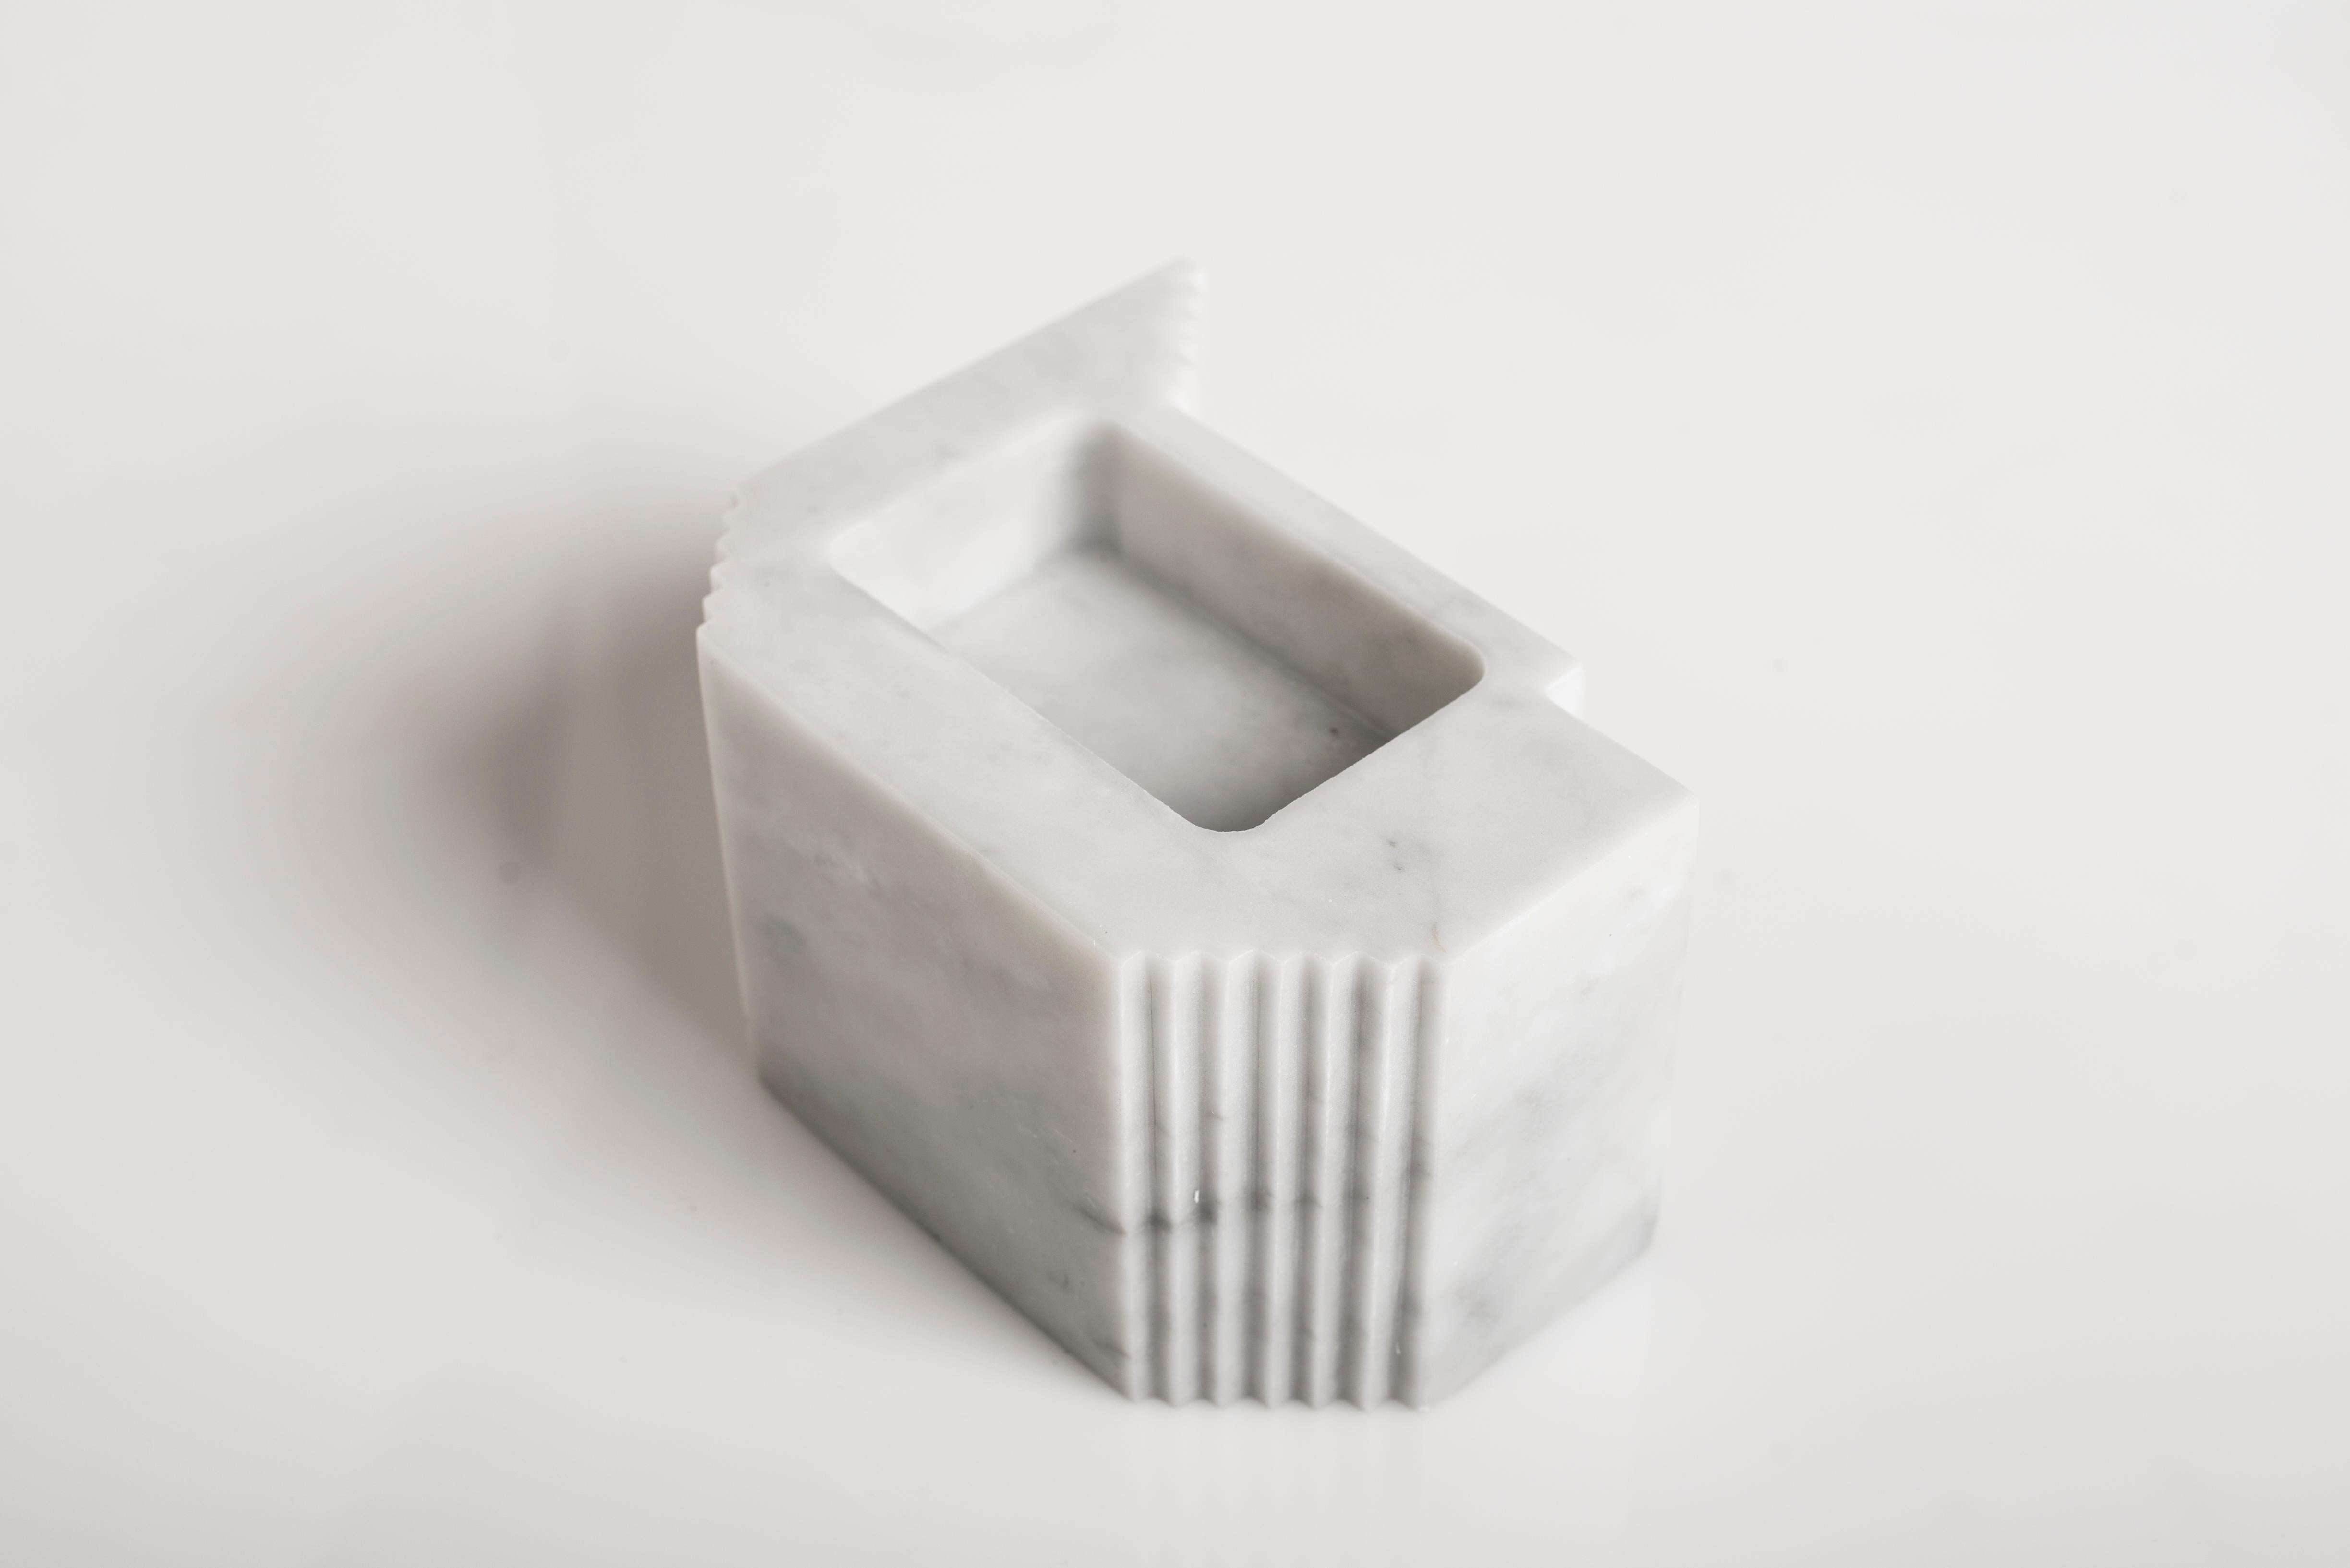 Treviso sculpture by Carlo Massoud.
Handmade. 
Dimensions: D 12 x W 15 x H 9 cm 
Materials: Carrara Marble

Carlo Massoud’s work stems from his relentless questioning of social, political, cultural, and environmental norms. He often pushes his